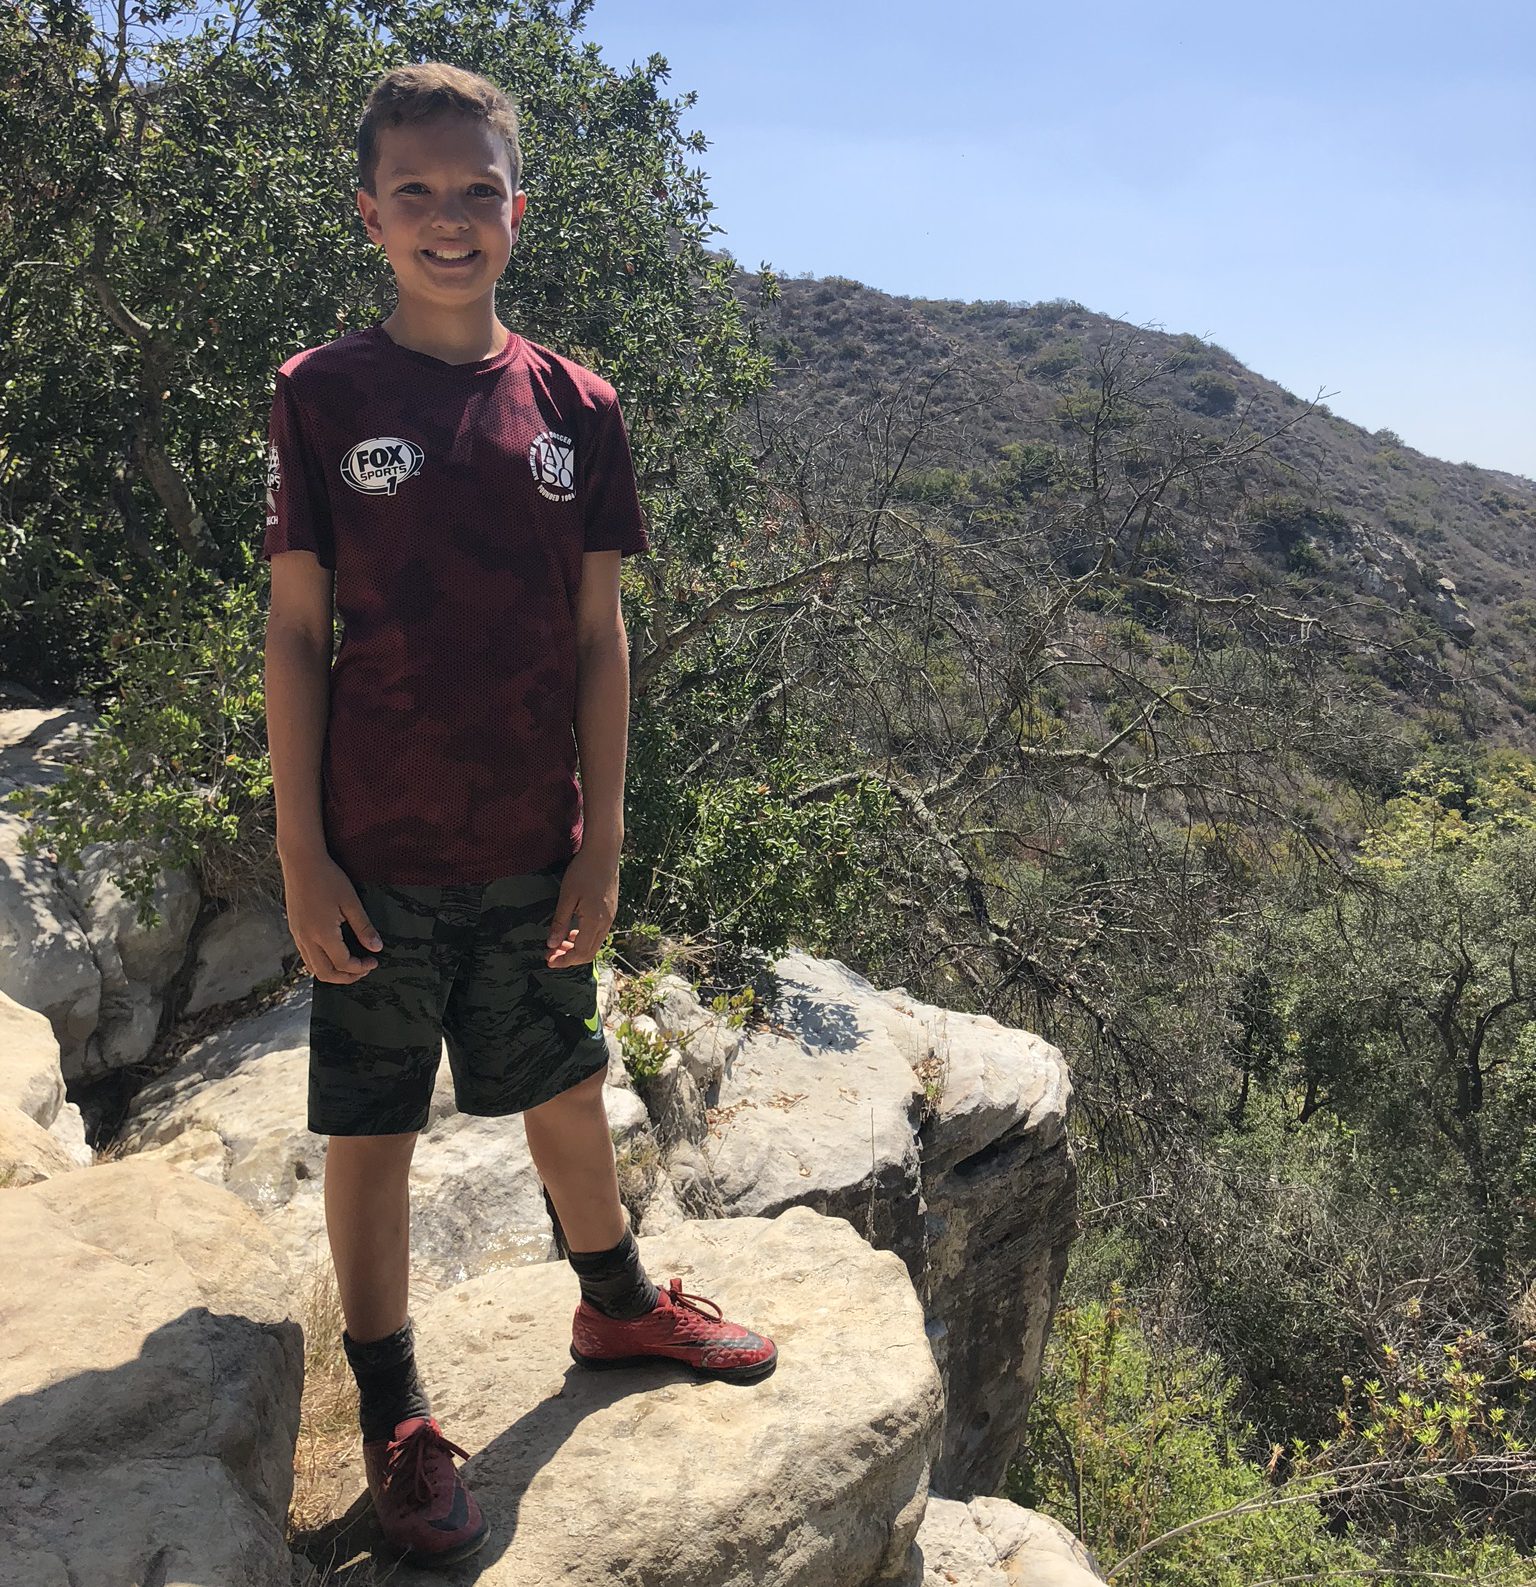 Young Boy on a hike, on top of rocky crest in canyon